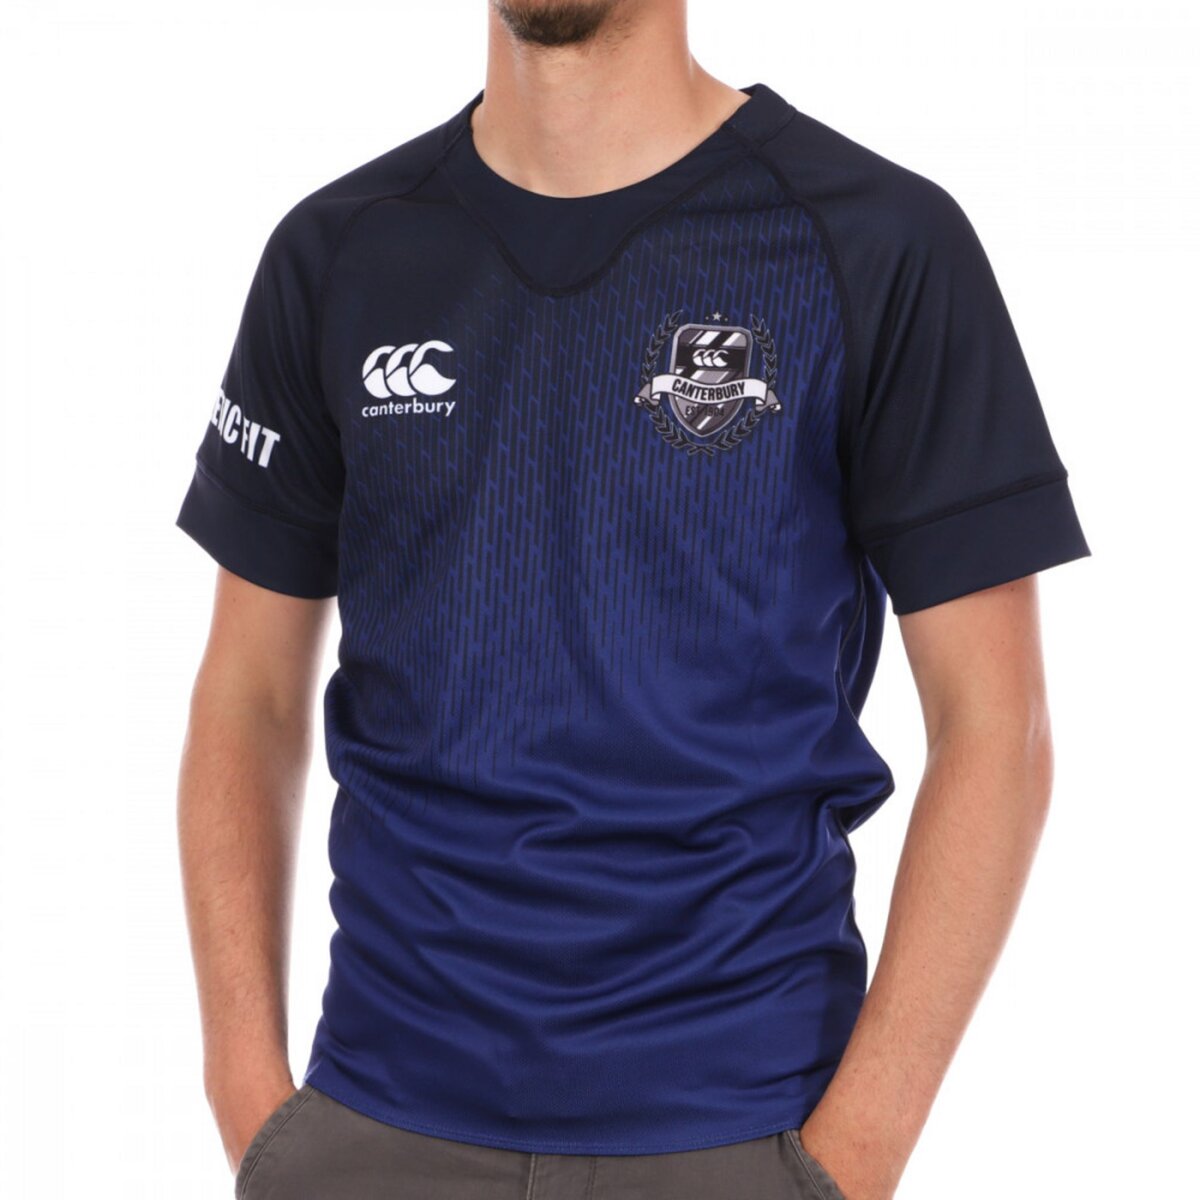 CANTERBURY Maillot Rugby Marine Homme Canterbury Pro Athletic pas